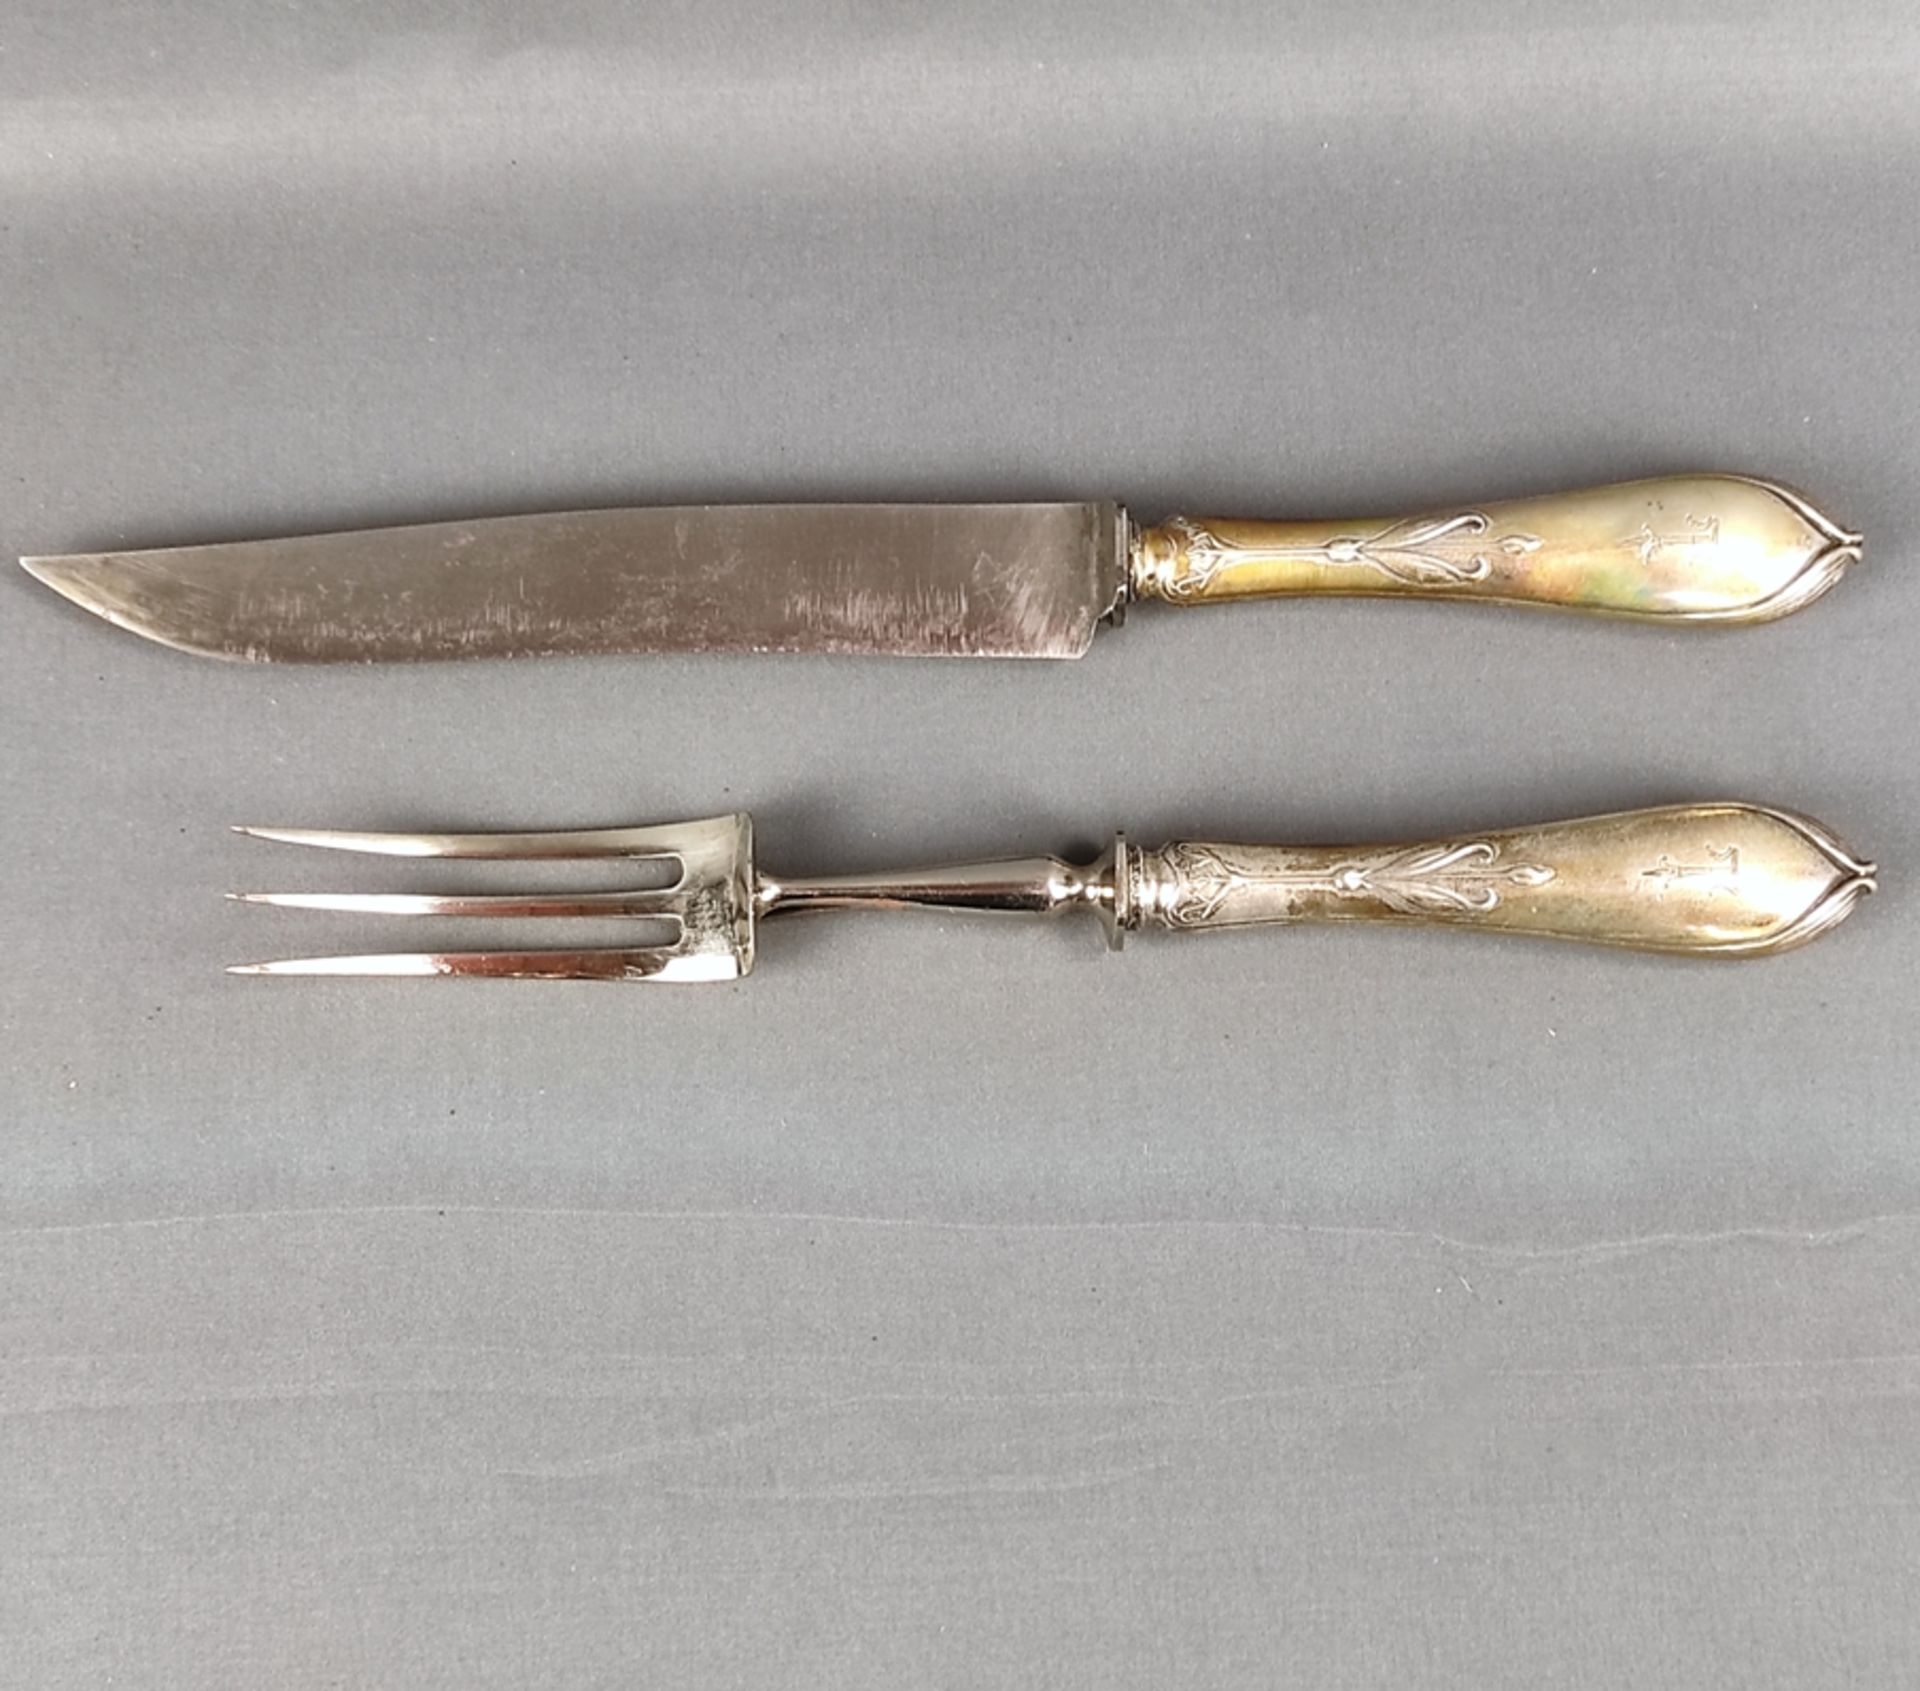 Presentation cutlery, silver 800, Koch and Bergfeld, Germany, Art Nouveau circa 1900, each with flo - Image 2 of 5